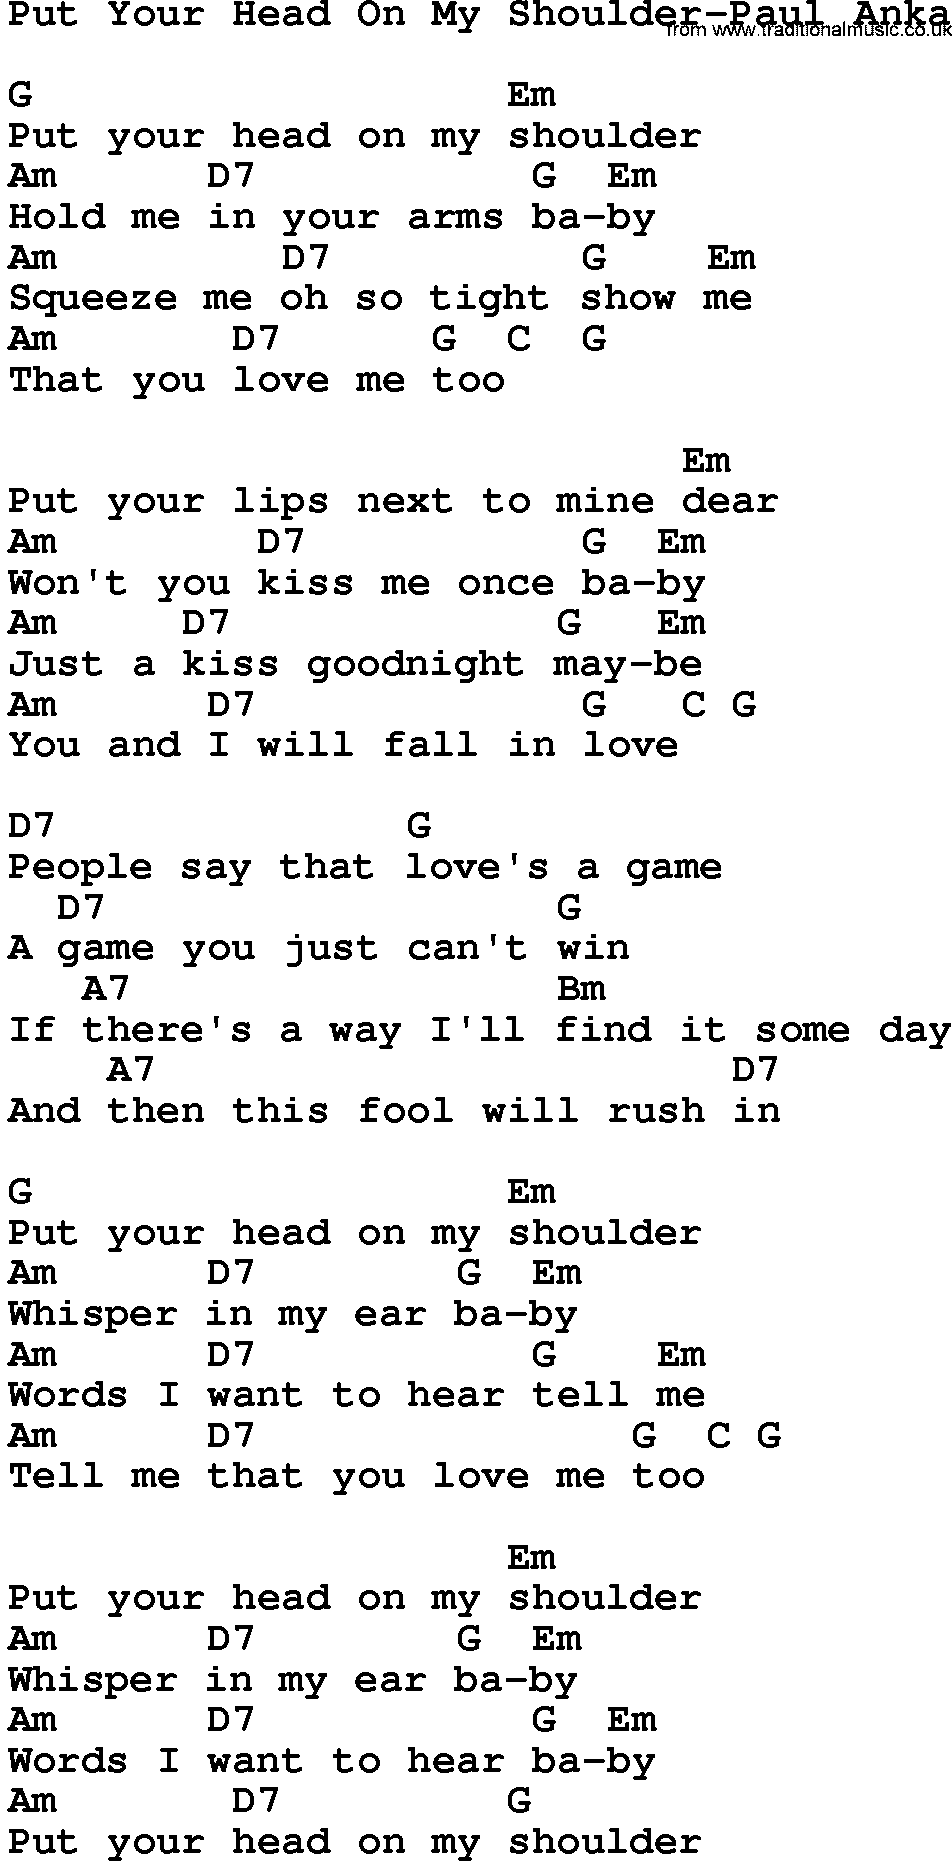 Country music song: Put Your Head On My Shoulder-Paul Anka lyrics and chords